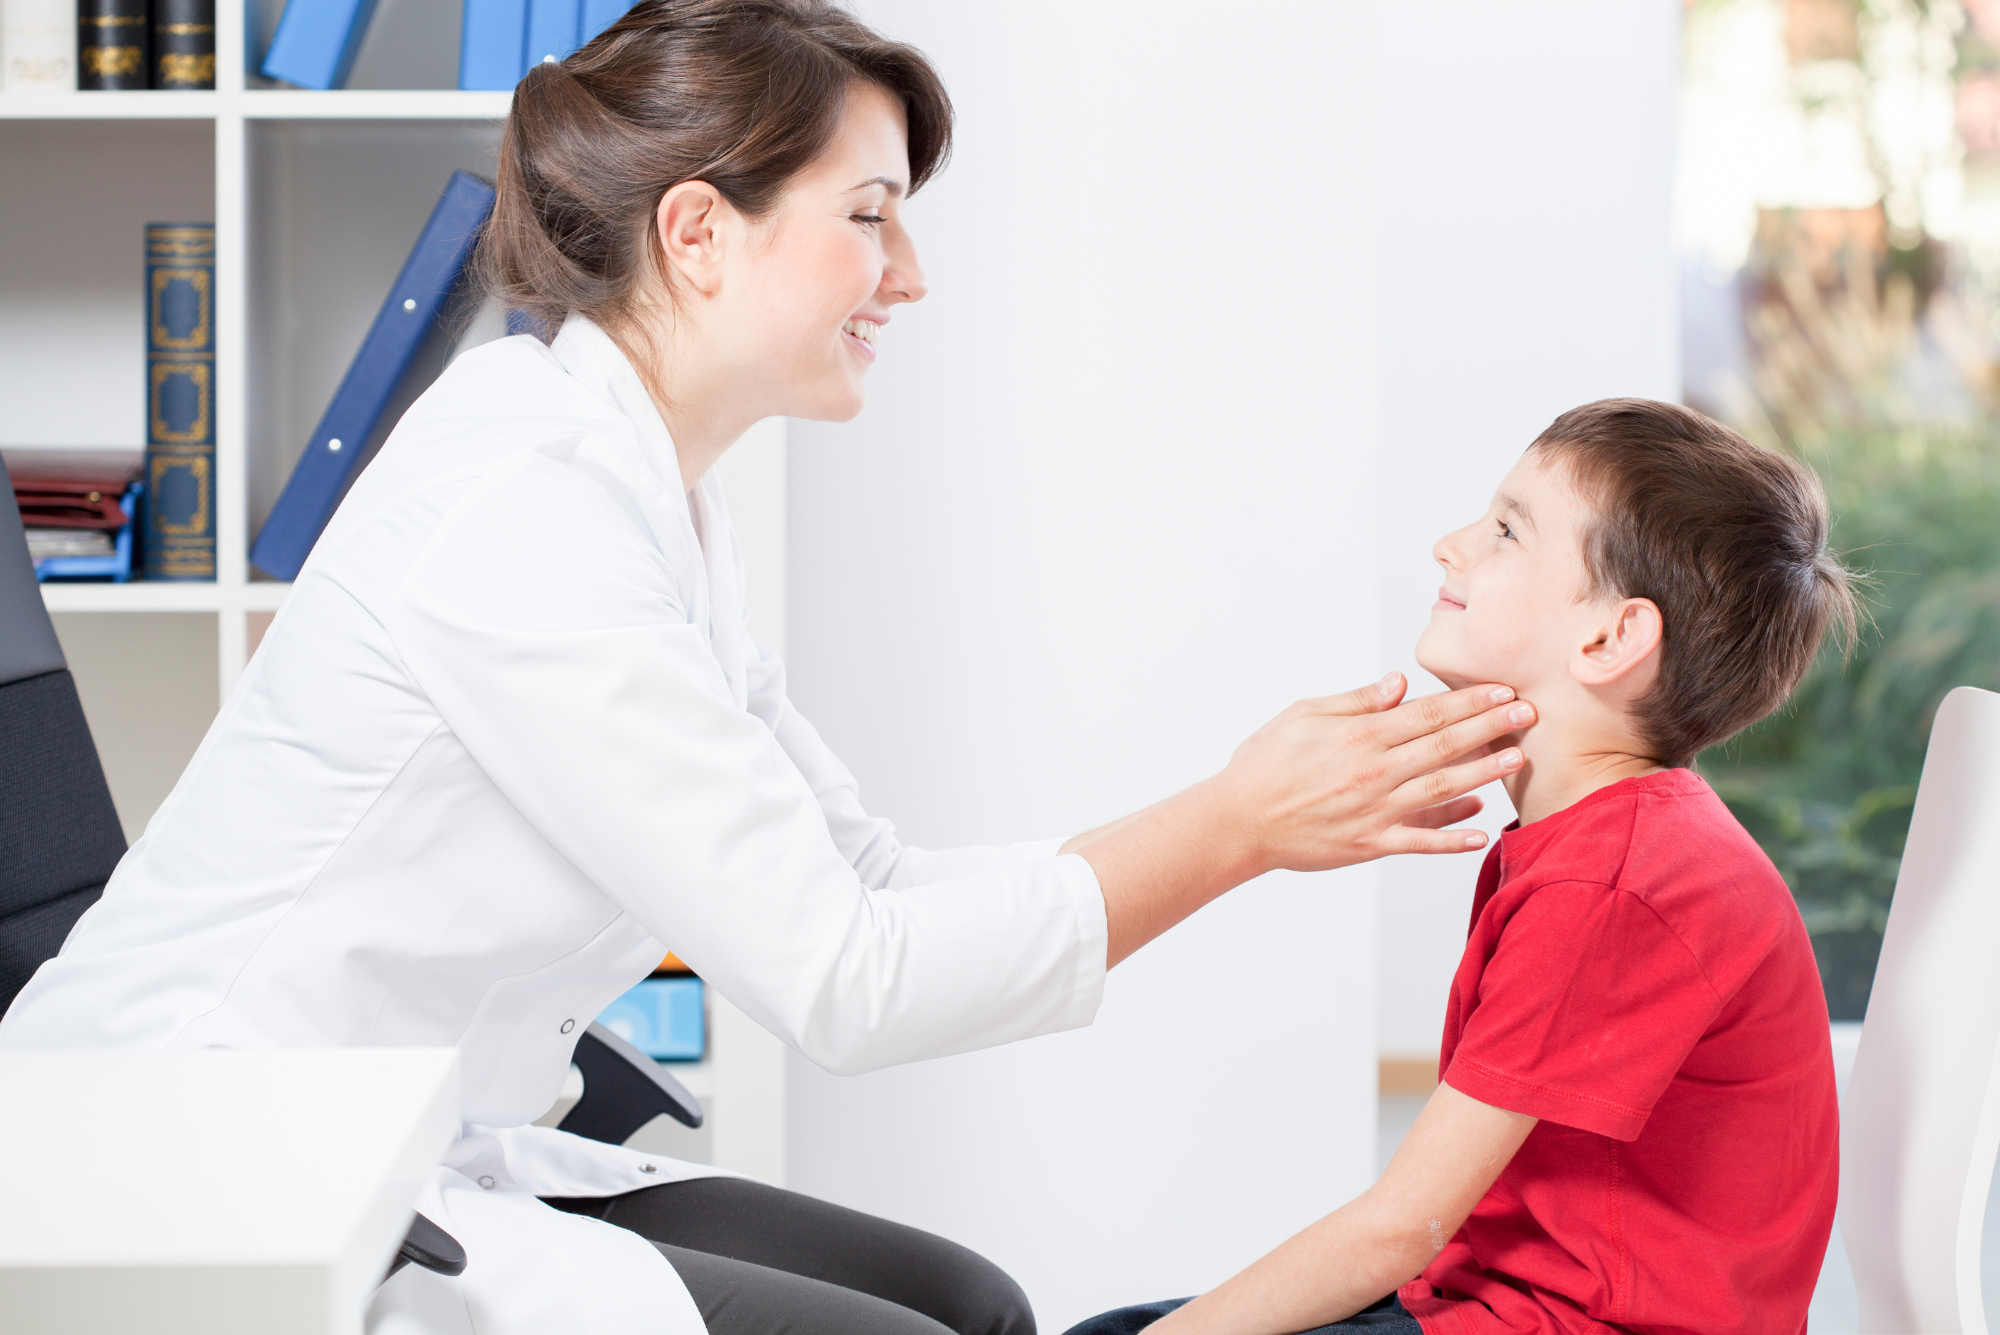 An ENT specialist examines a young boy's swollen lymph nodes to prepare for a lymph node excision procedure.